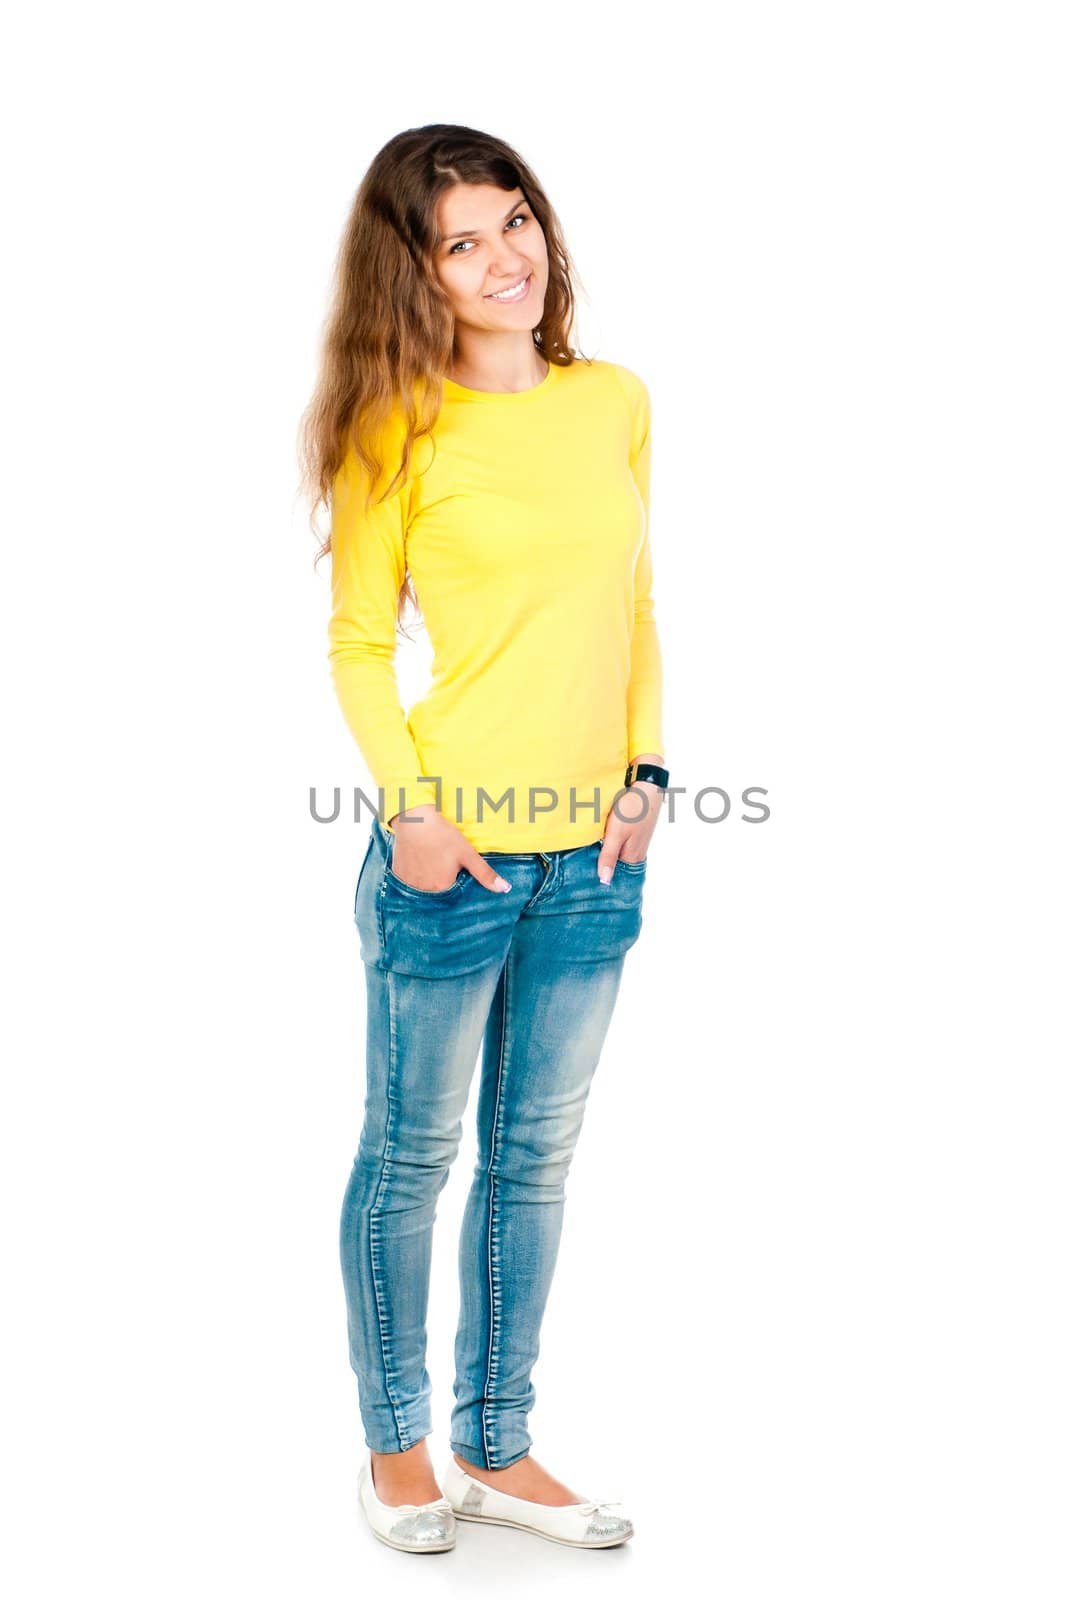 young girl isolated on white background